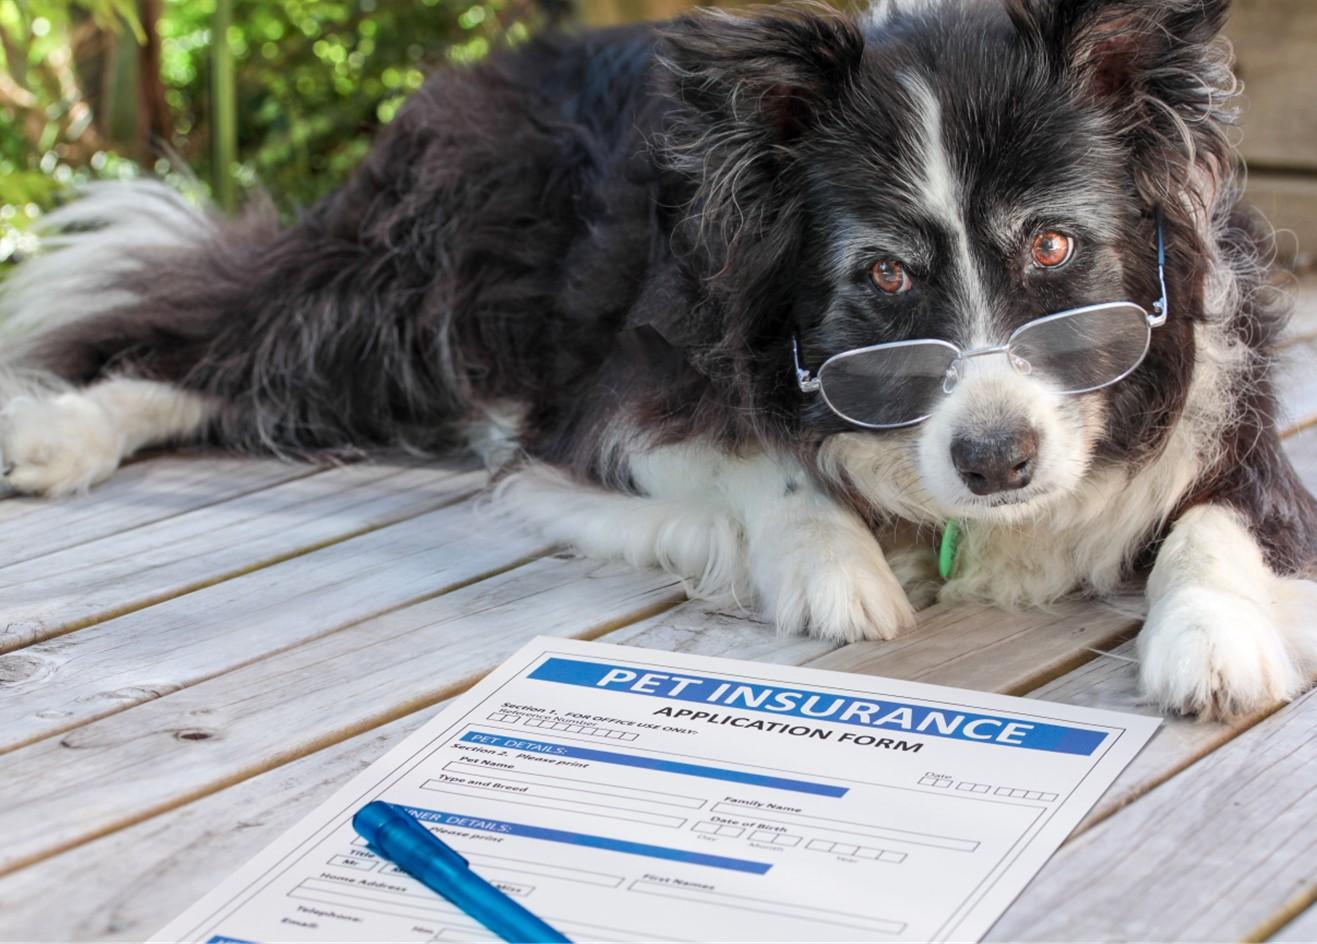 Black and white dog wearing eye glasses laying next to a pet insurance application form.